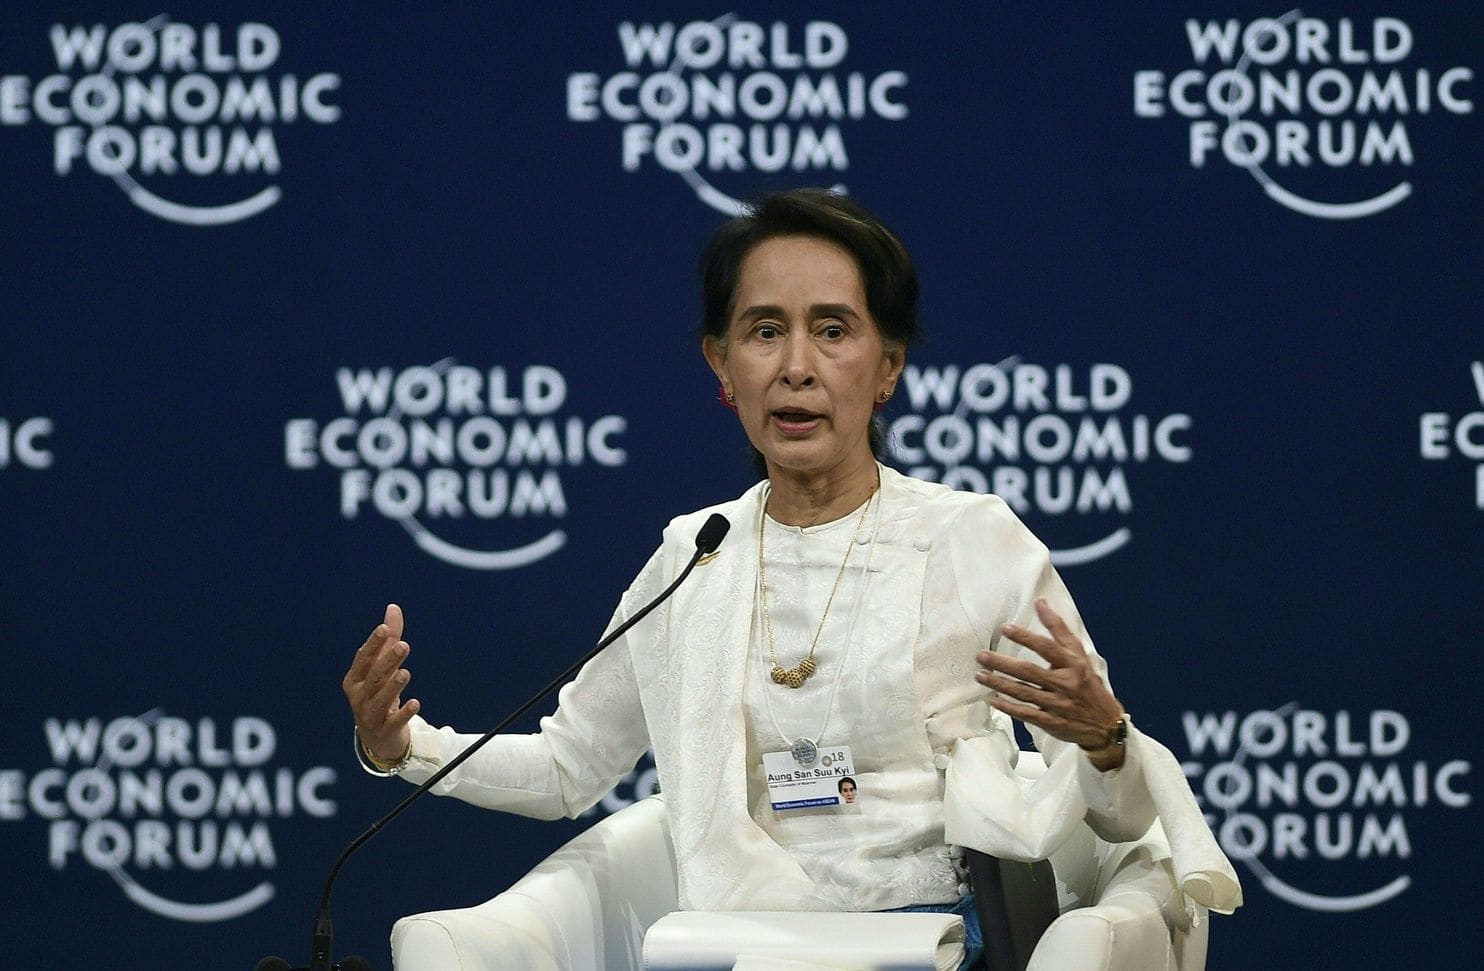 Myanmar State Counsellor Aung San Suu Kyi speaks at the on ASEAN World Economic Forum in Hanoi on Sept. 13, 2018. Photo: Ye Aung Thu / AFP